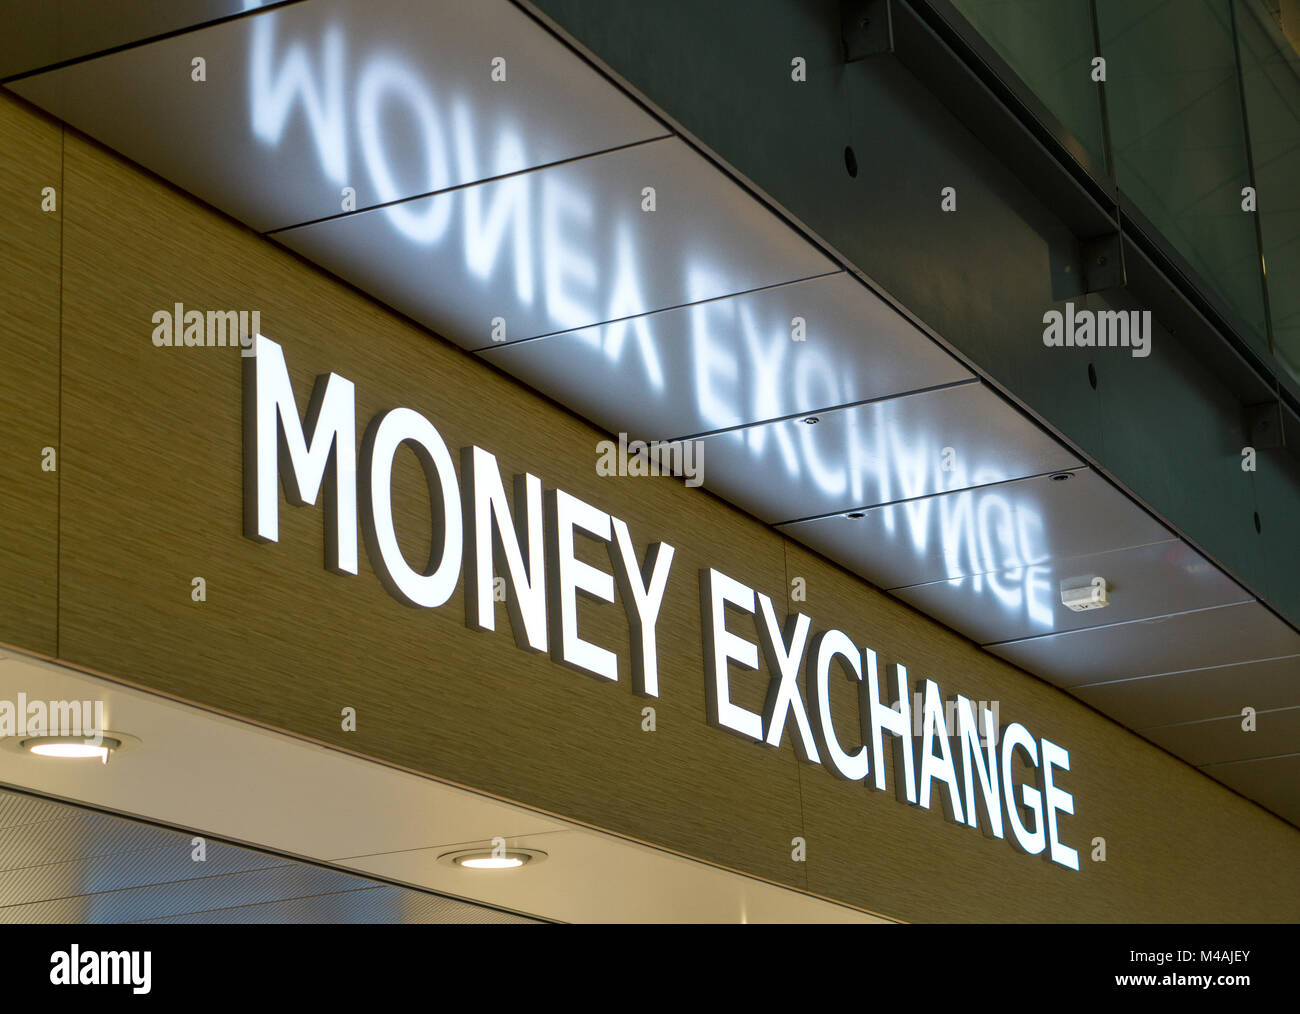 Money exchange office for changing currency. Stock Photo